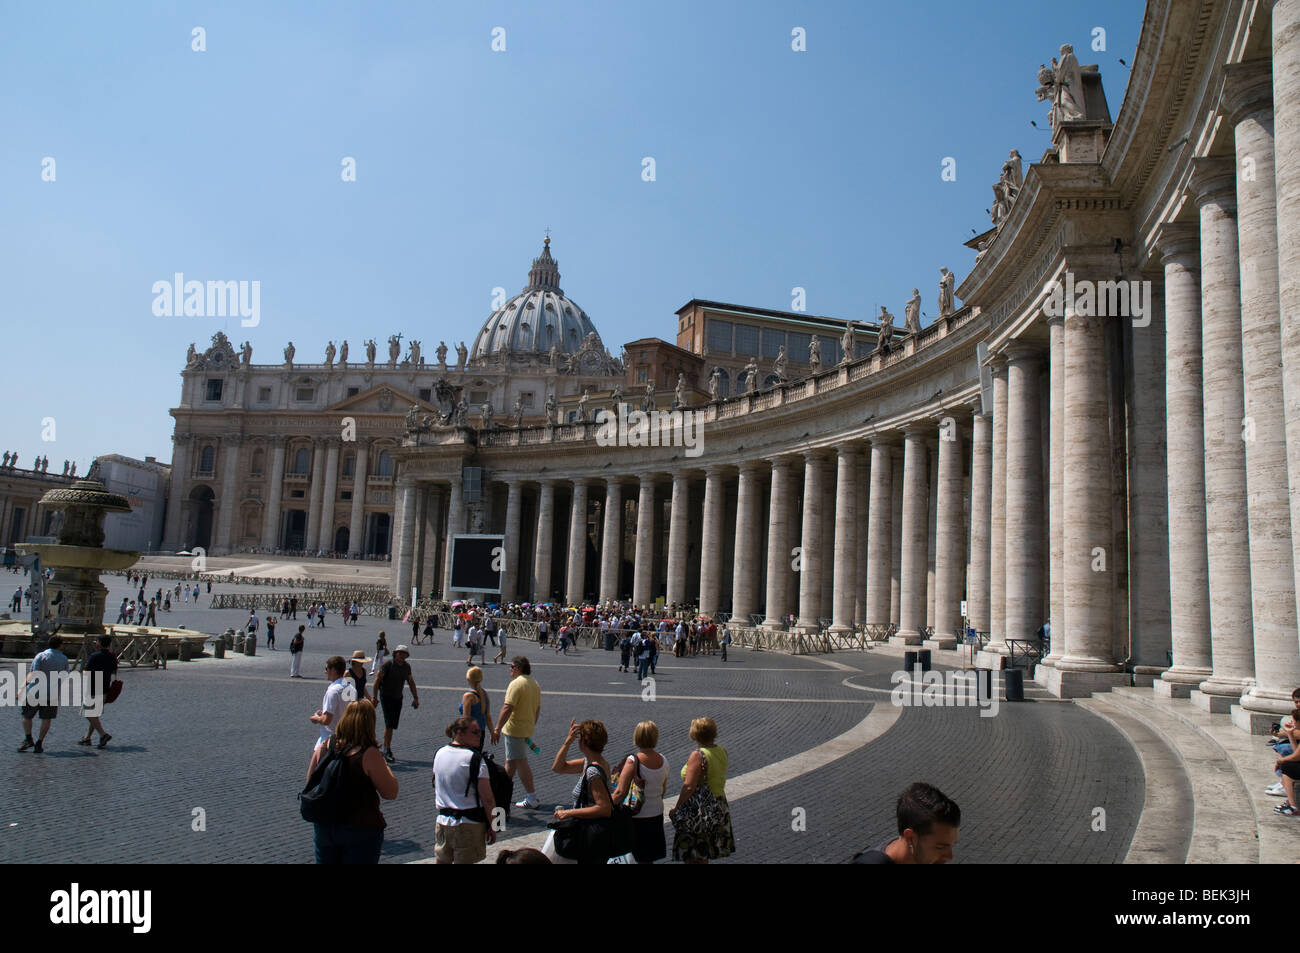 View of Saint Peter's square in Vatican, Rome Stock Photo